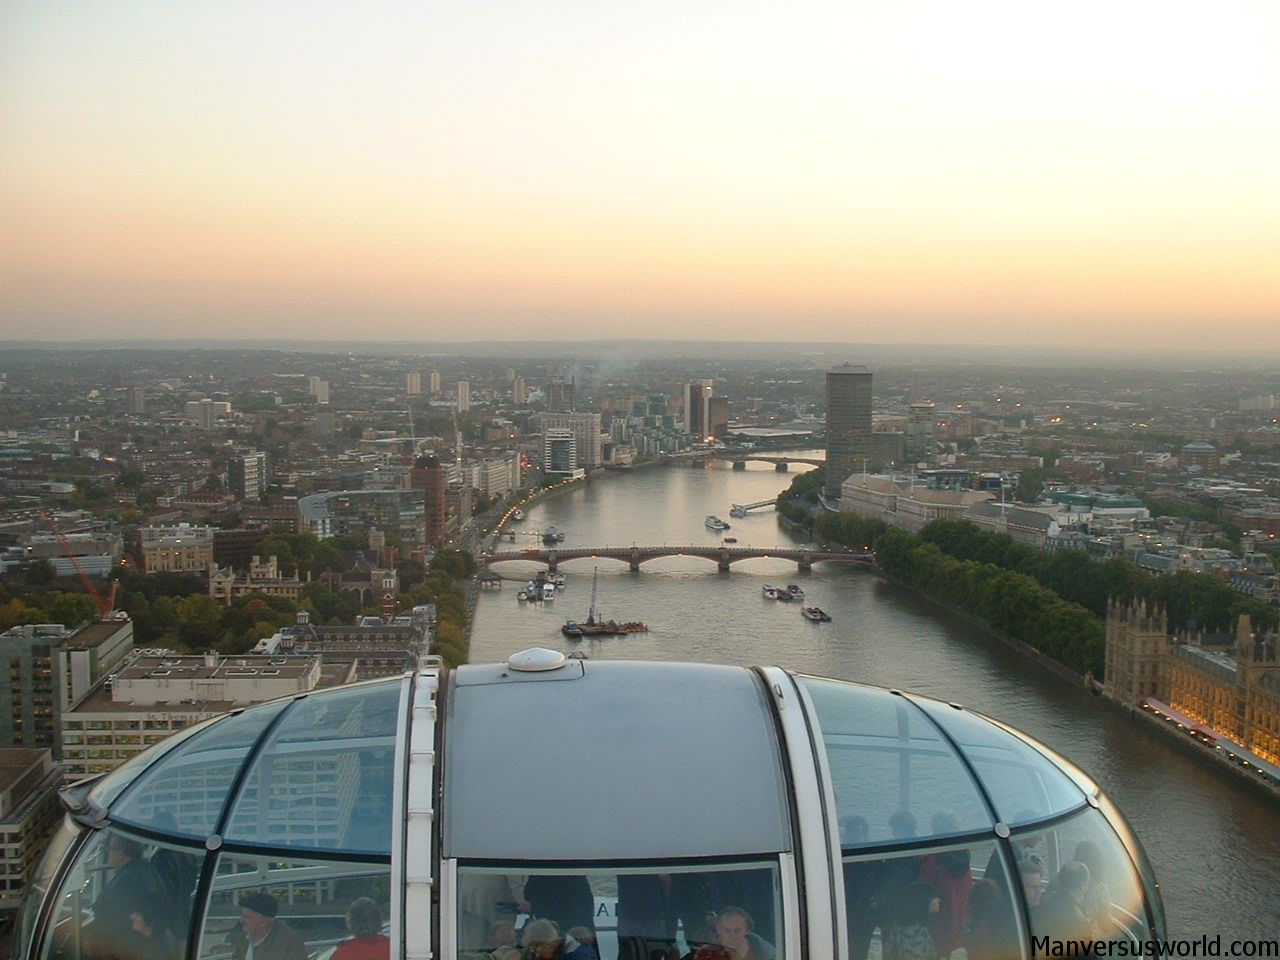 The view from the London Eye